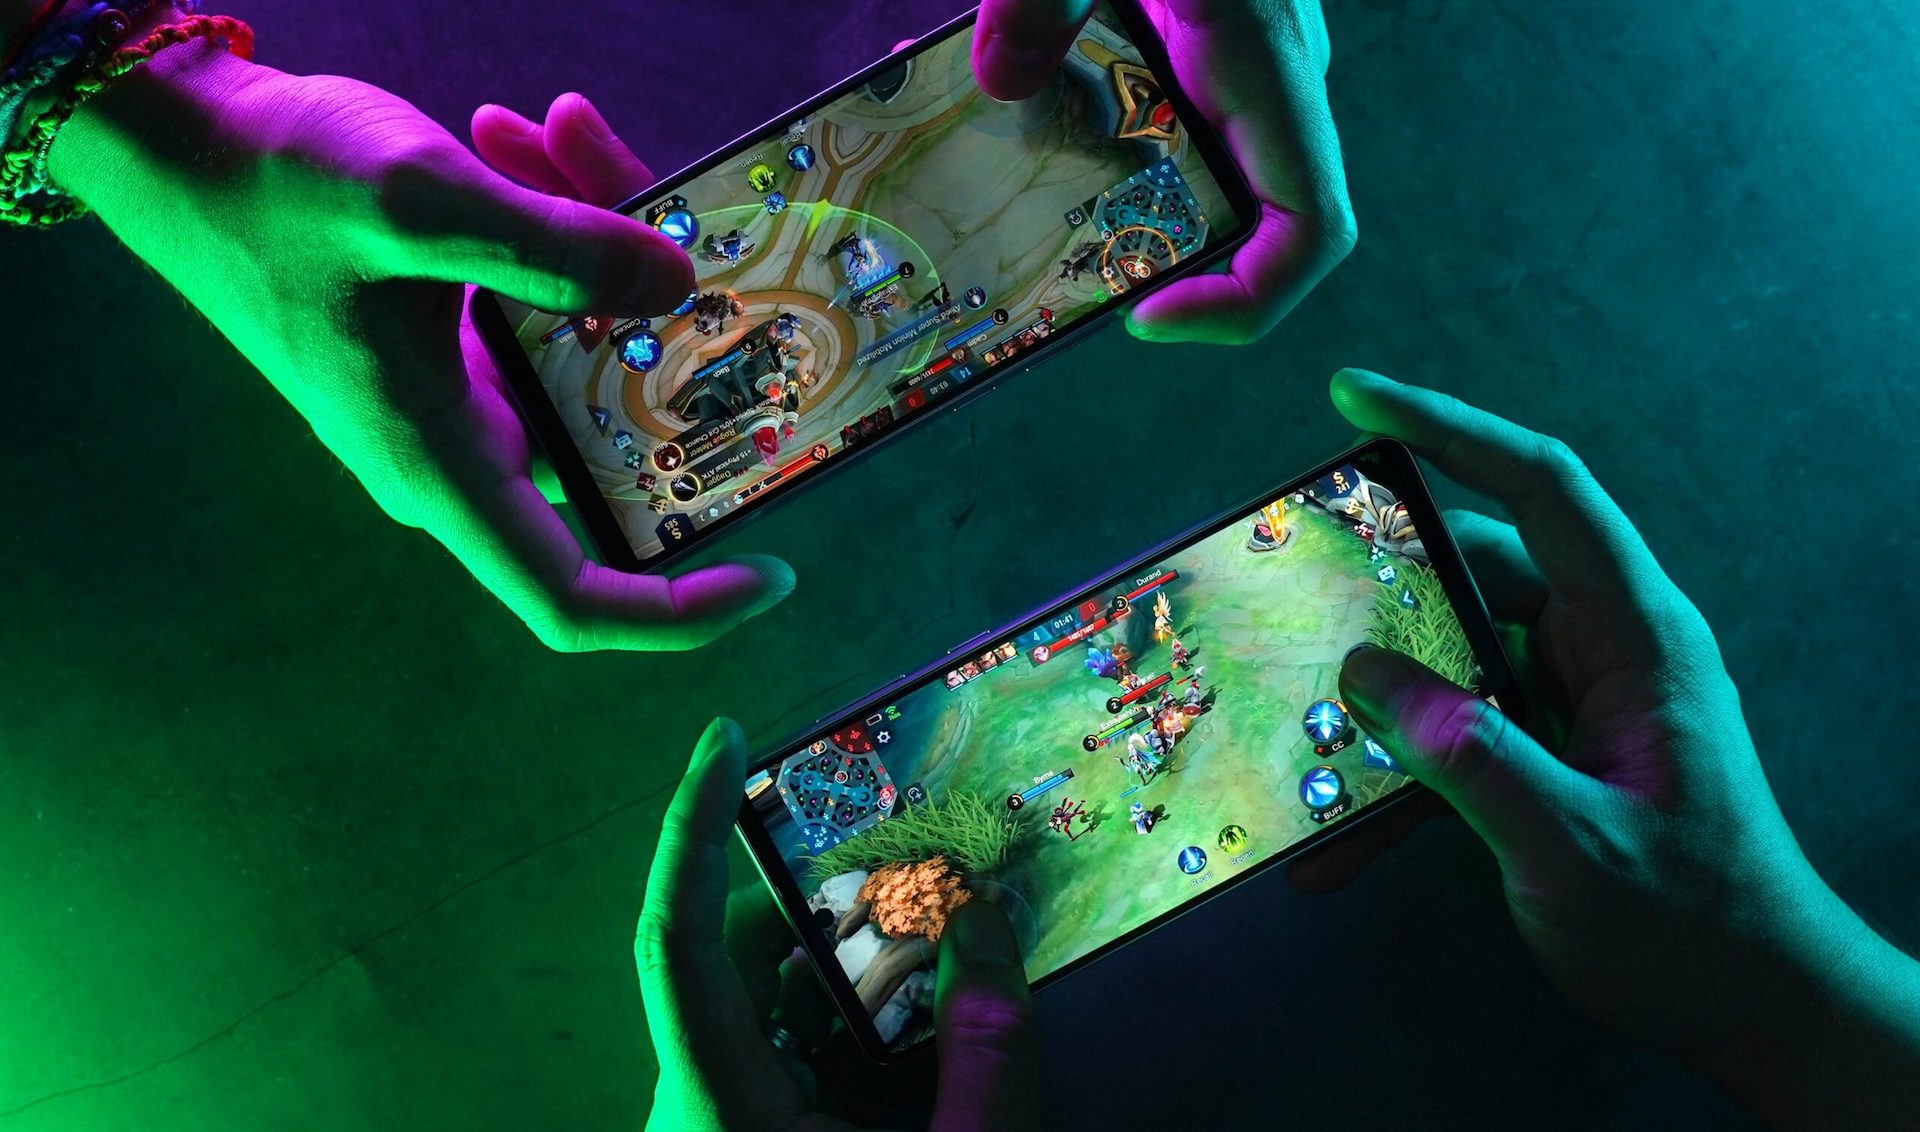 Mobile games will account for 56% of global gaming market revenue in 2023